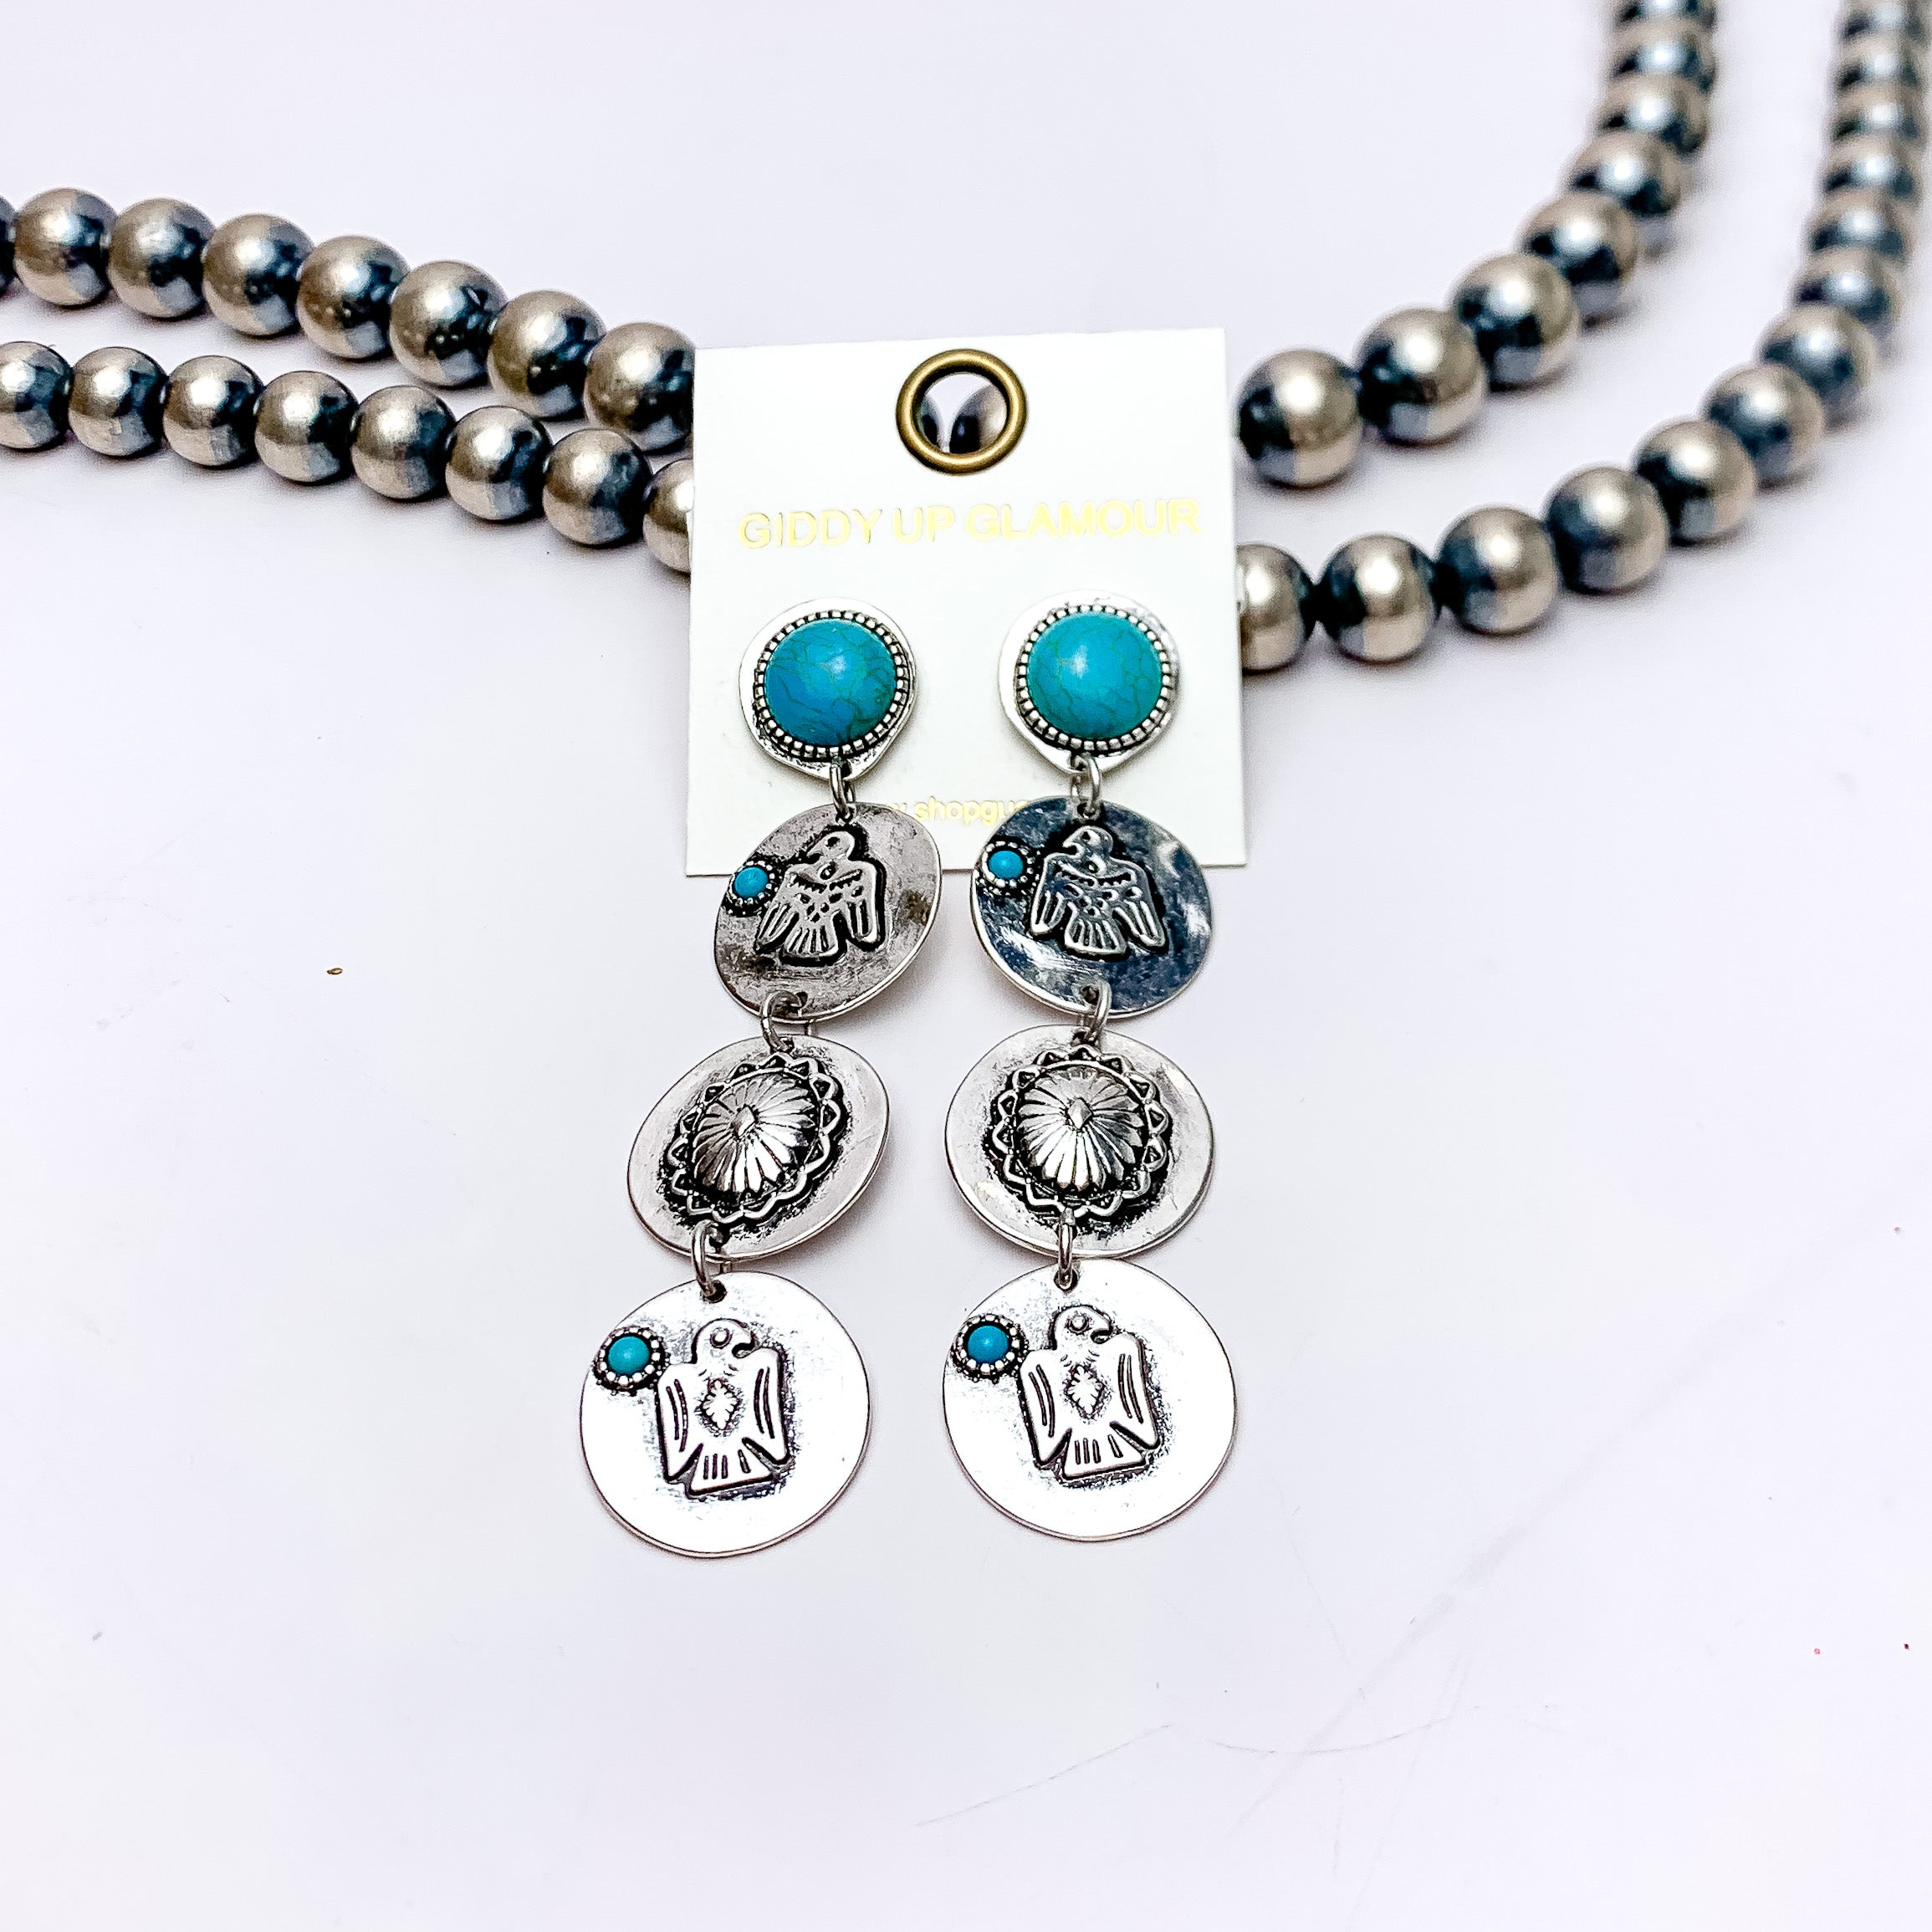 Three Tier Thunder Bird Earrings in Silver Tone and Turquoise Blue. These earrings are pictured laying against Navajo pearls and a white background.